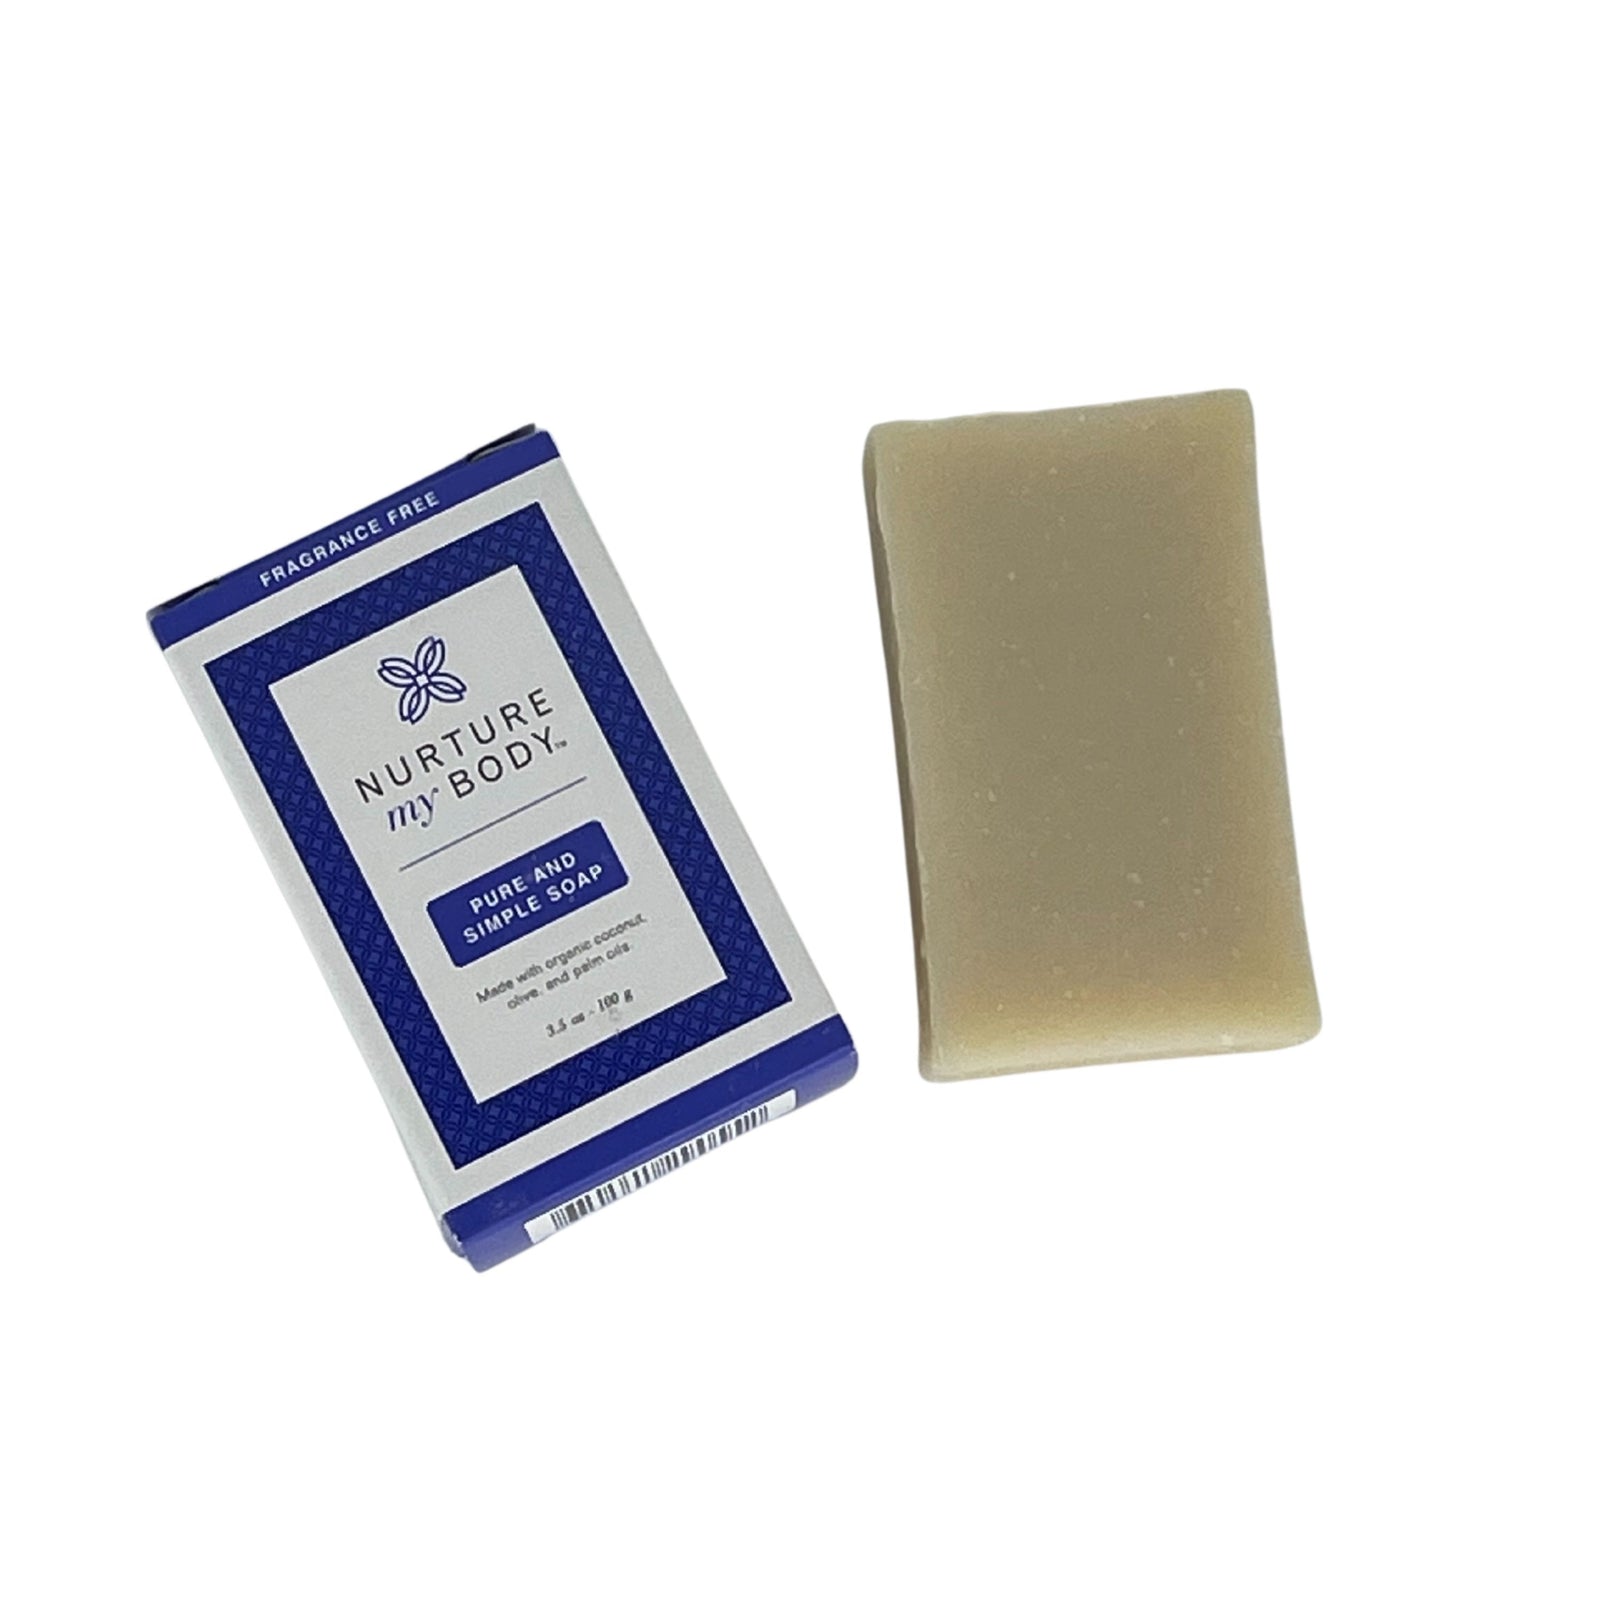 Pure & Simple (Unscented) - Handcrafted Soap Bar